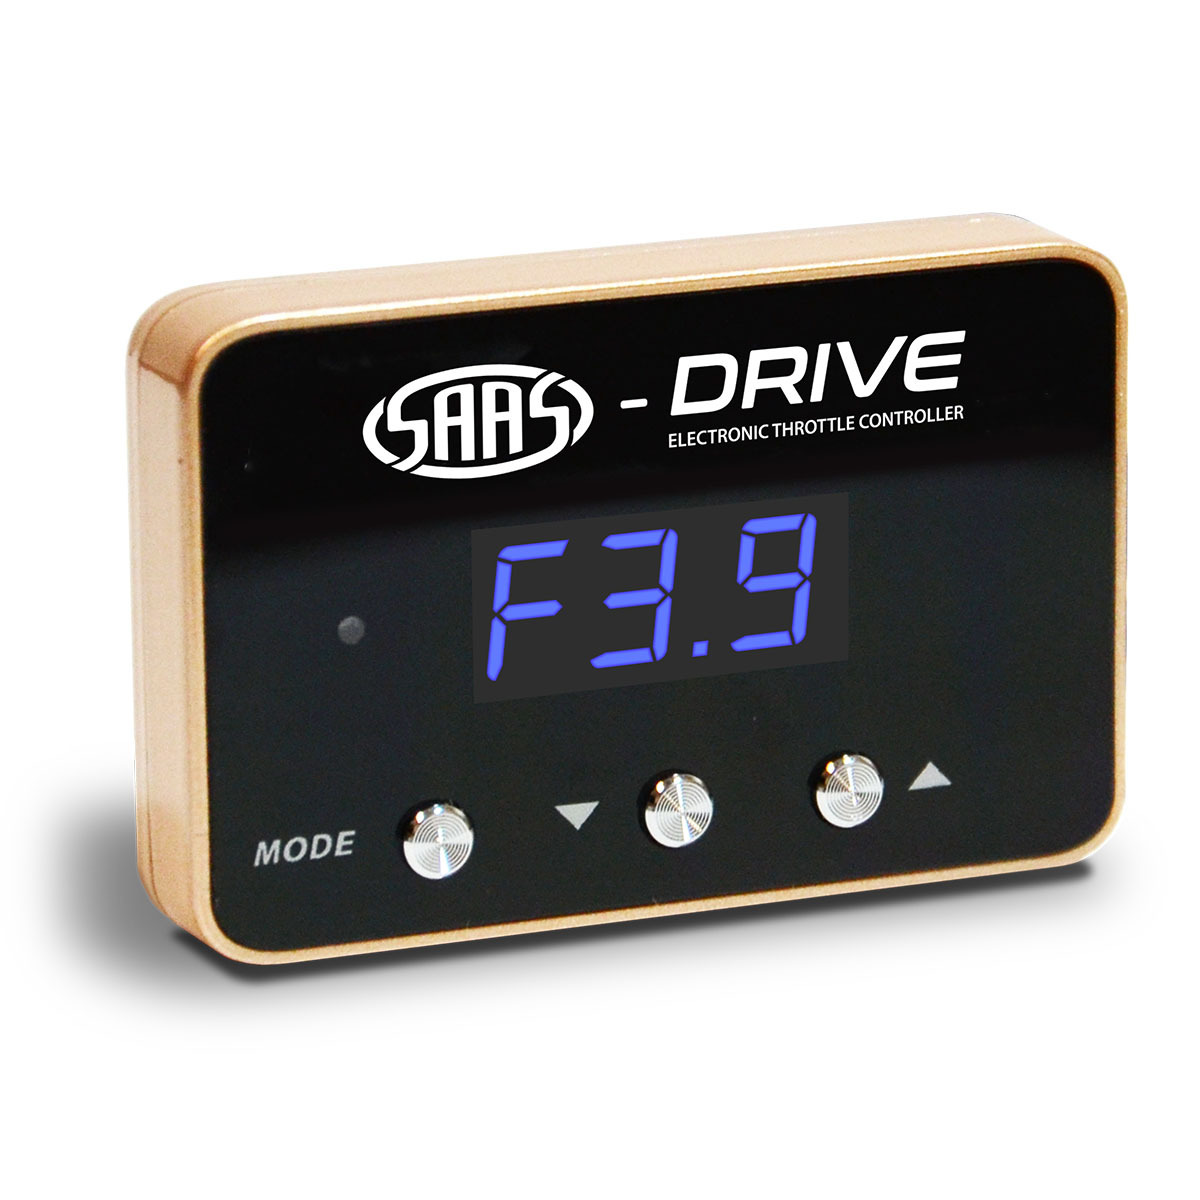 SAAS-Drive Ford Ranger PXII 2015 - 2018 Throttle Controller 